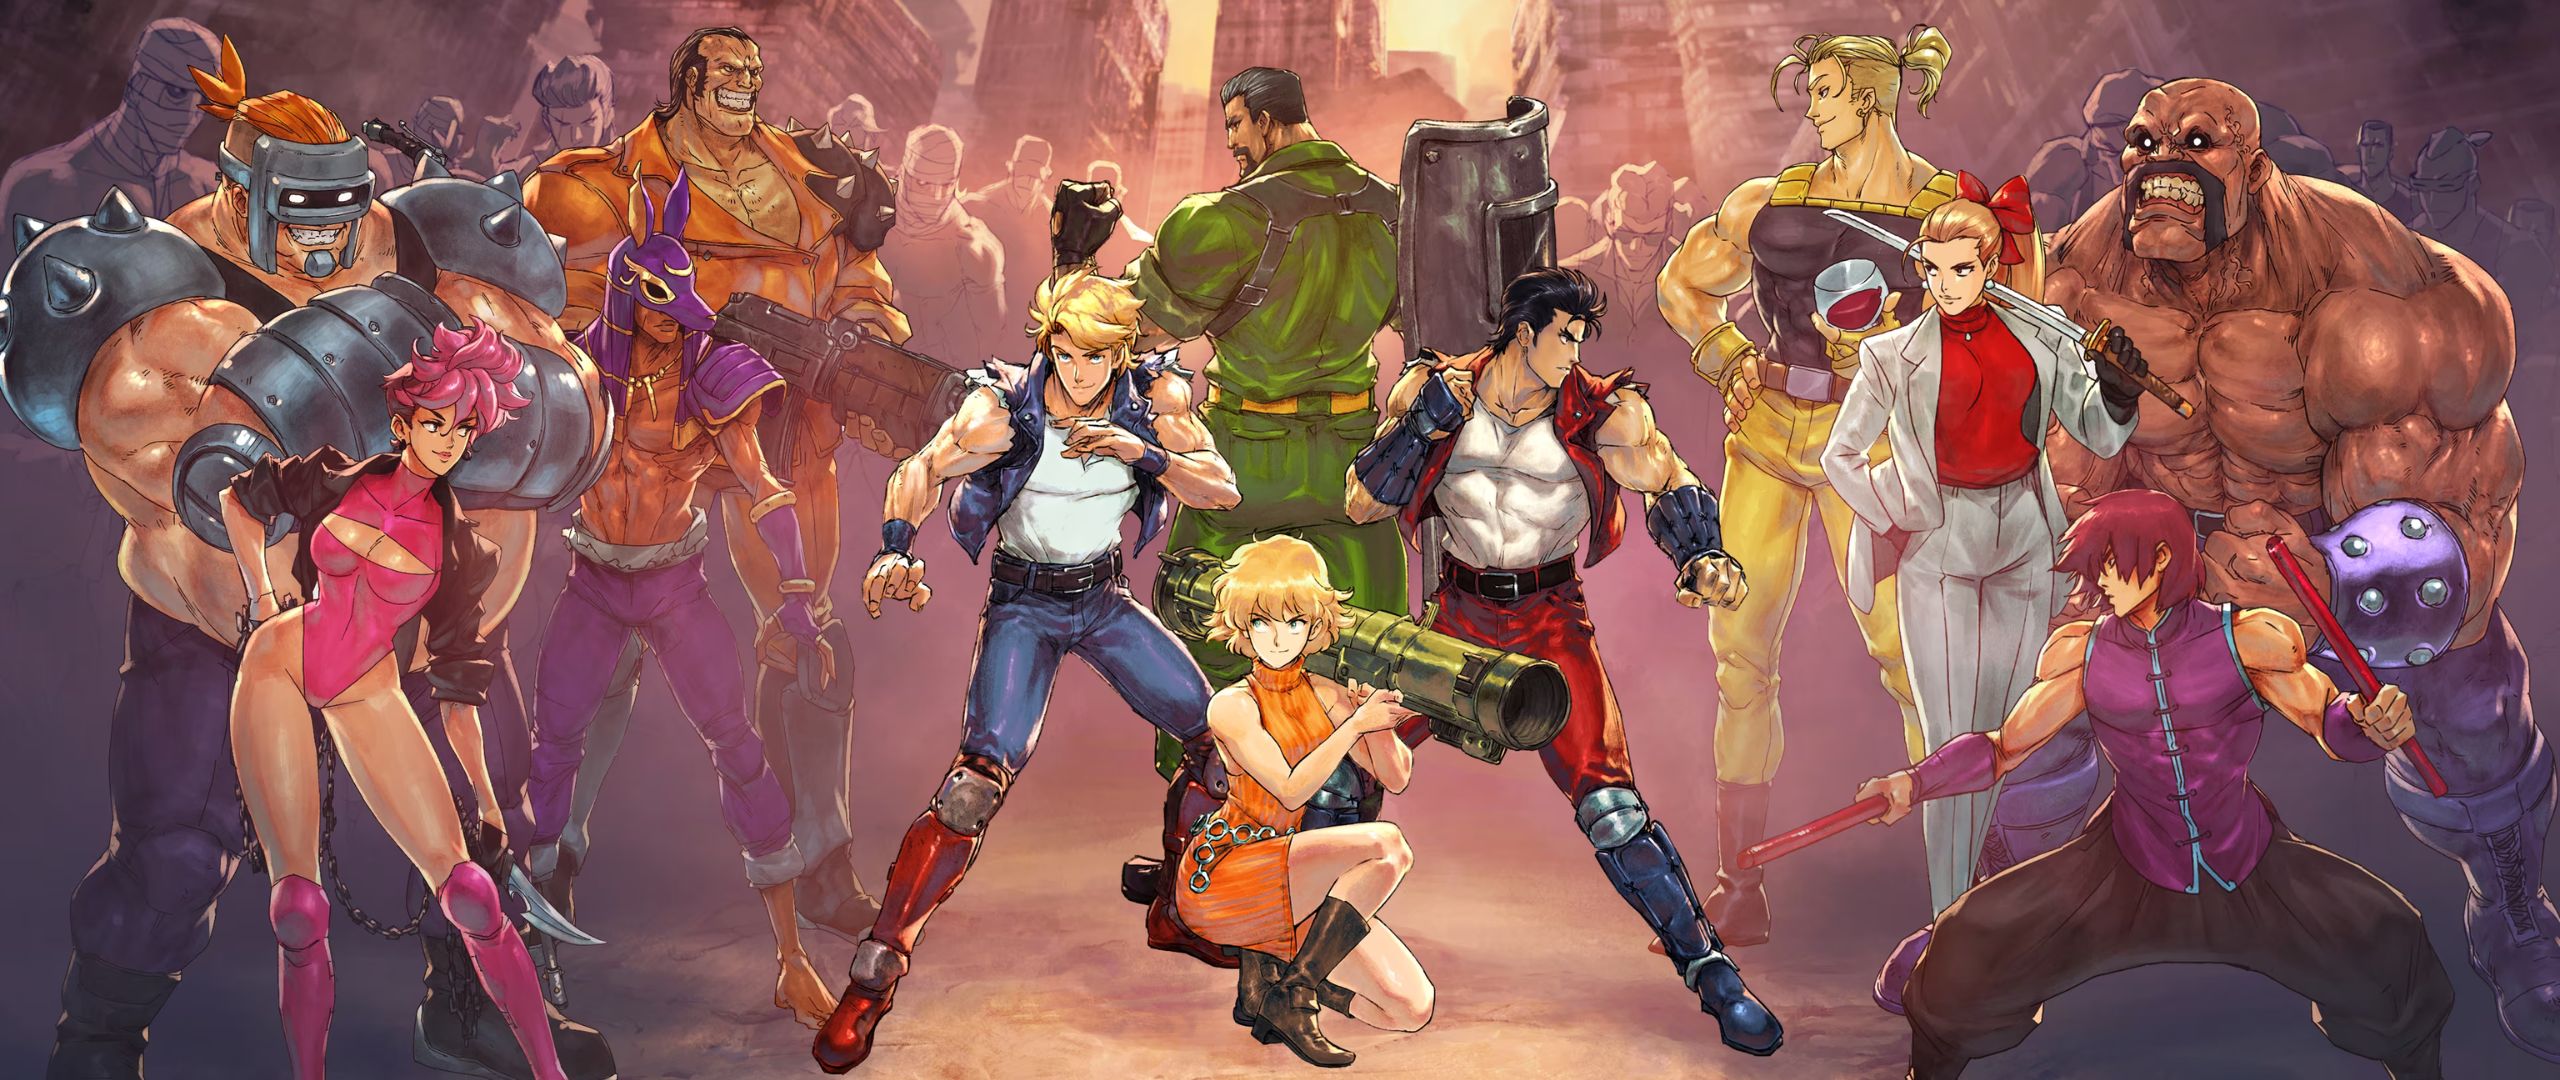 Double Dragon Gaiden: Rise of the Dragons review - kick it old school ...